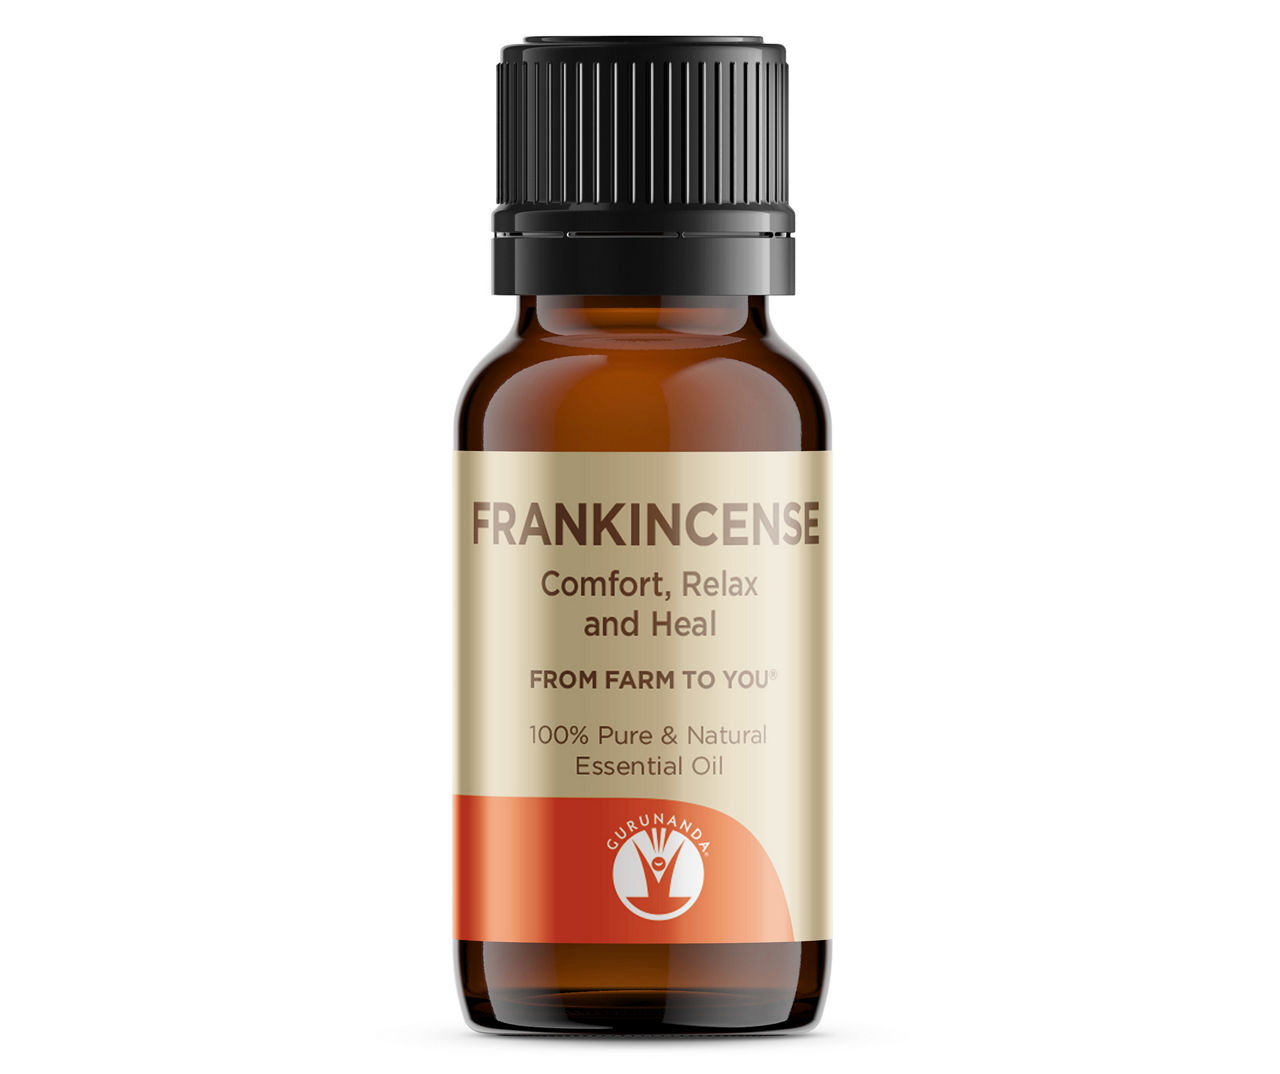 The Best Ways To Use Frankincense Oil on Your Face